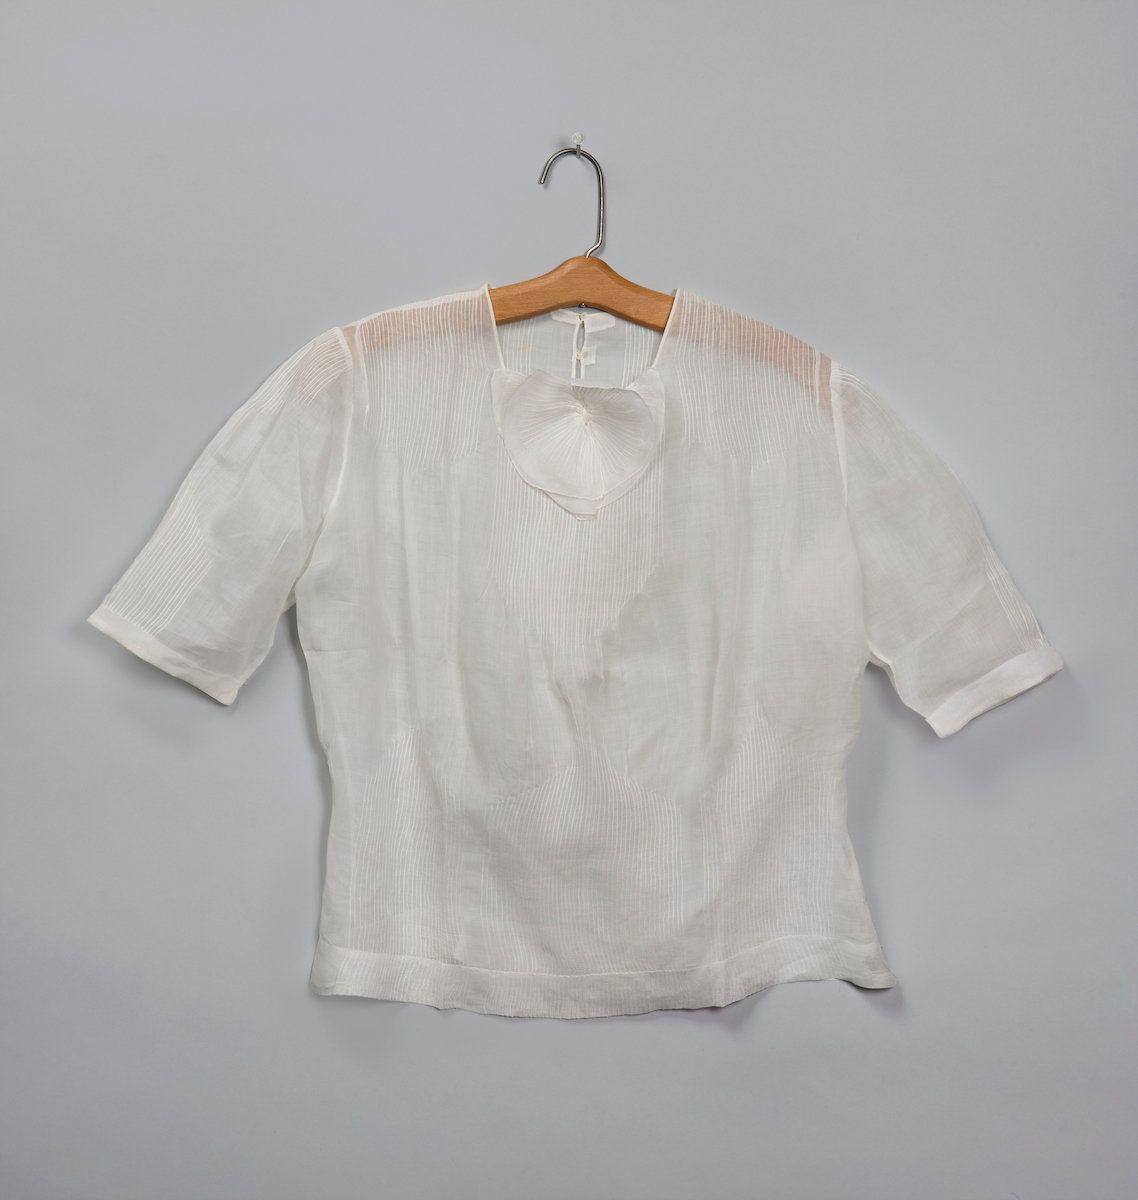 Blouse attributed to Georgia O’Keeffe, circa early to mid-1930s, white linen. 